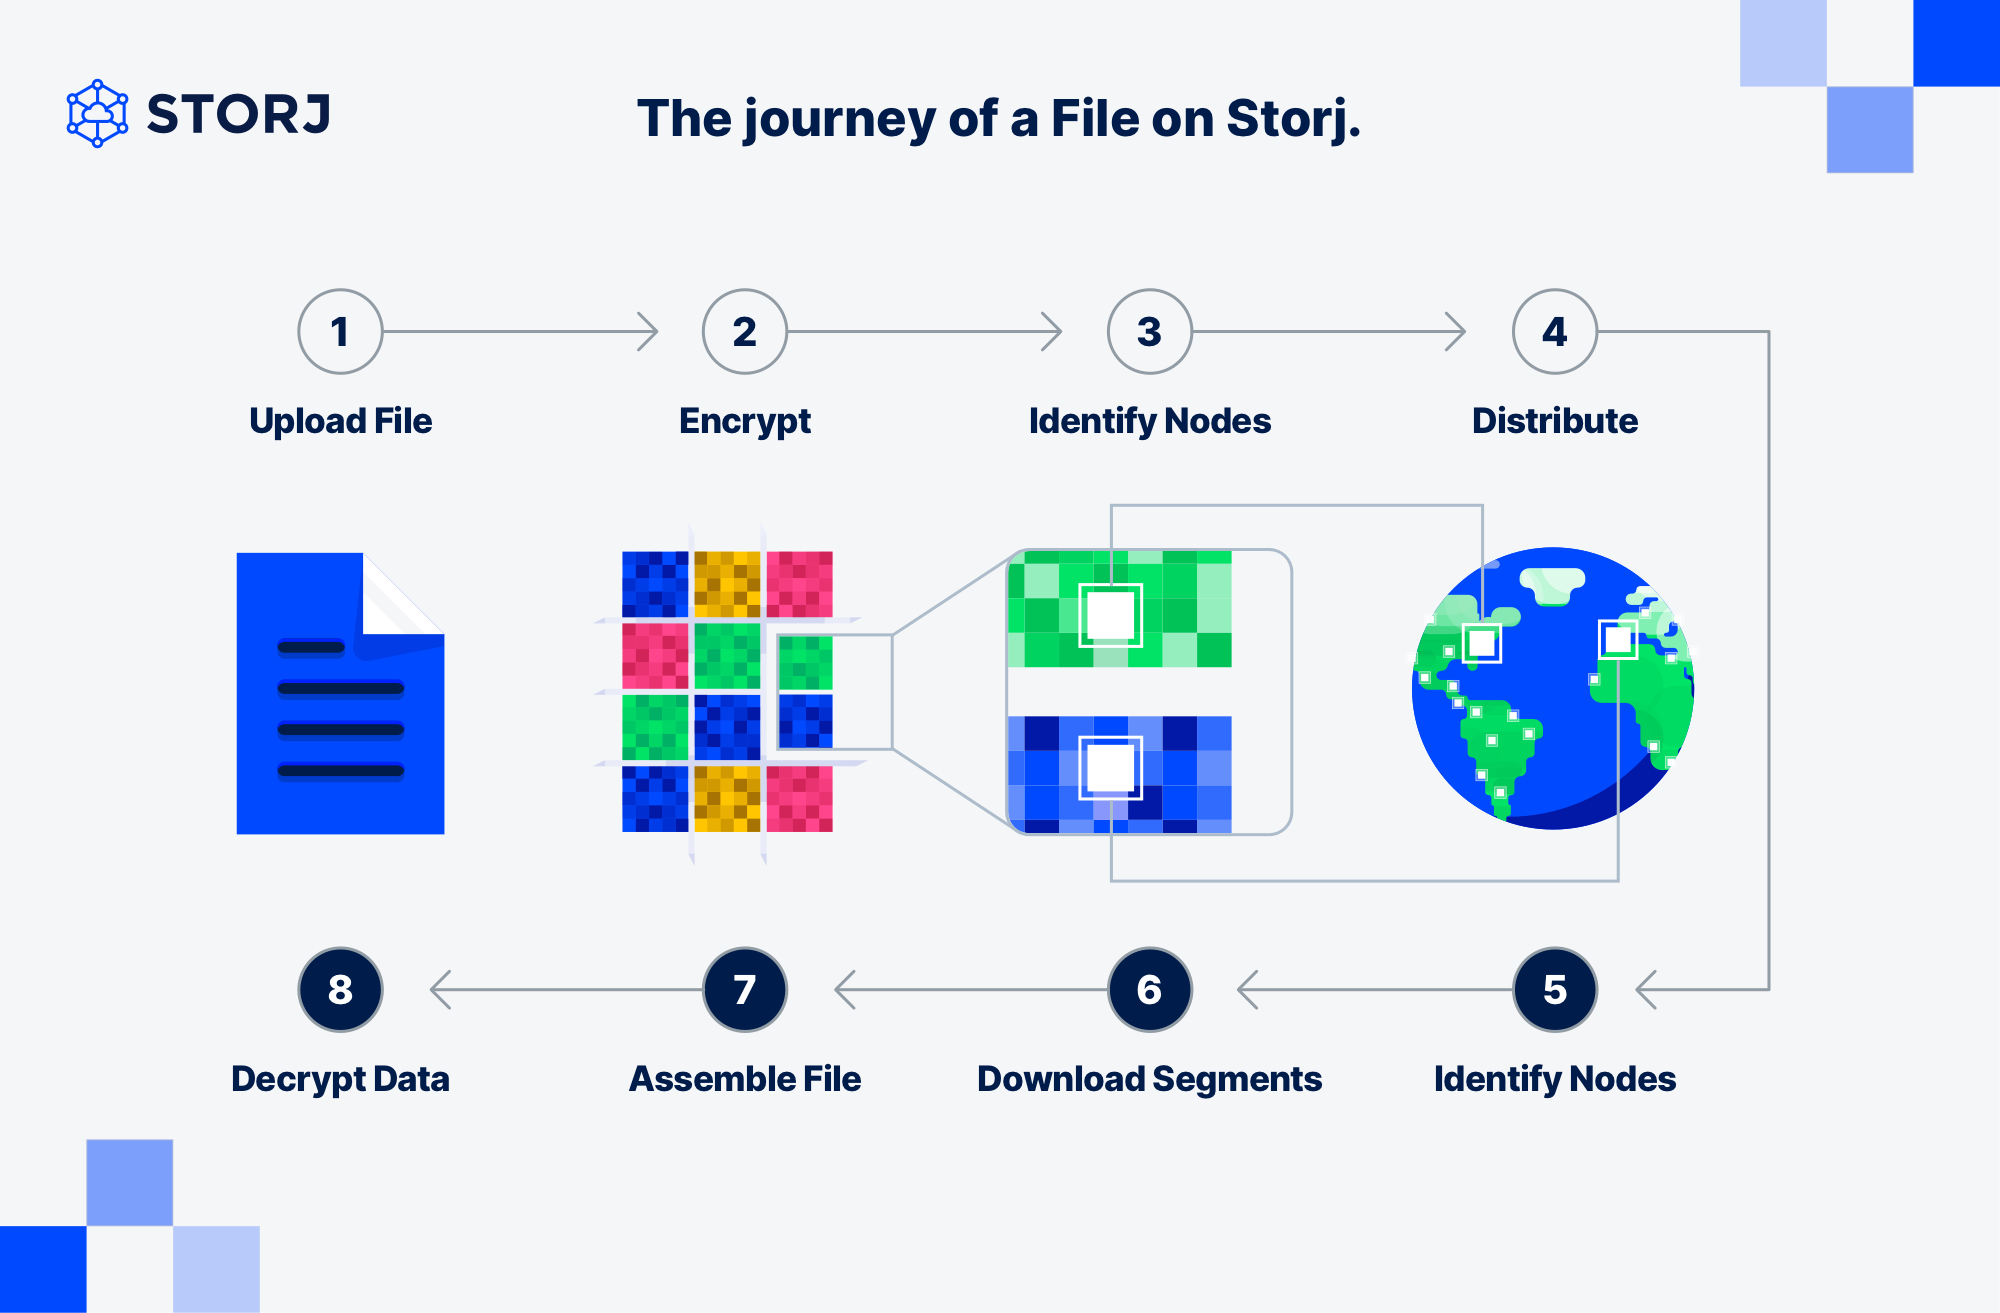 Storj Next could make decentralized storage more appealing to both supply and demand sides